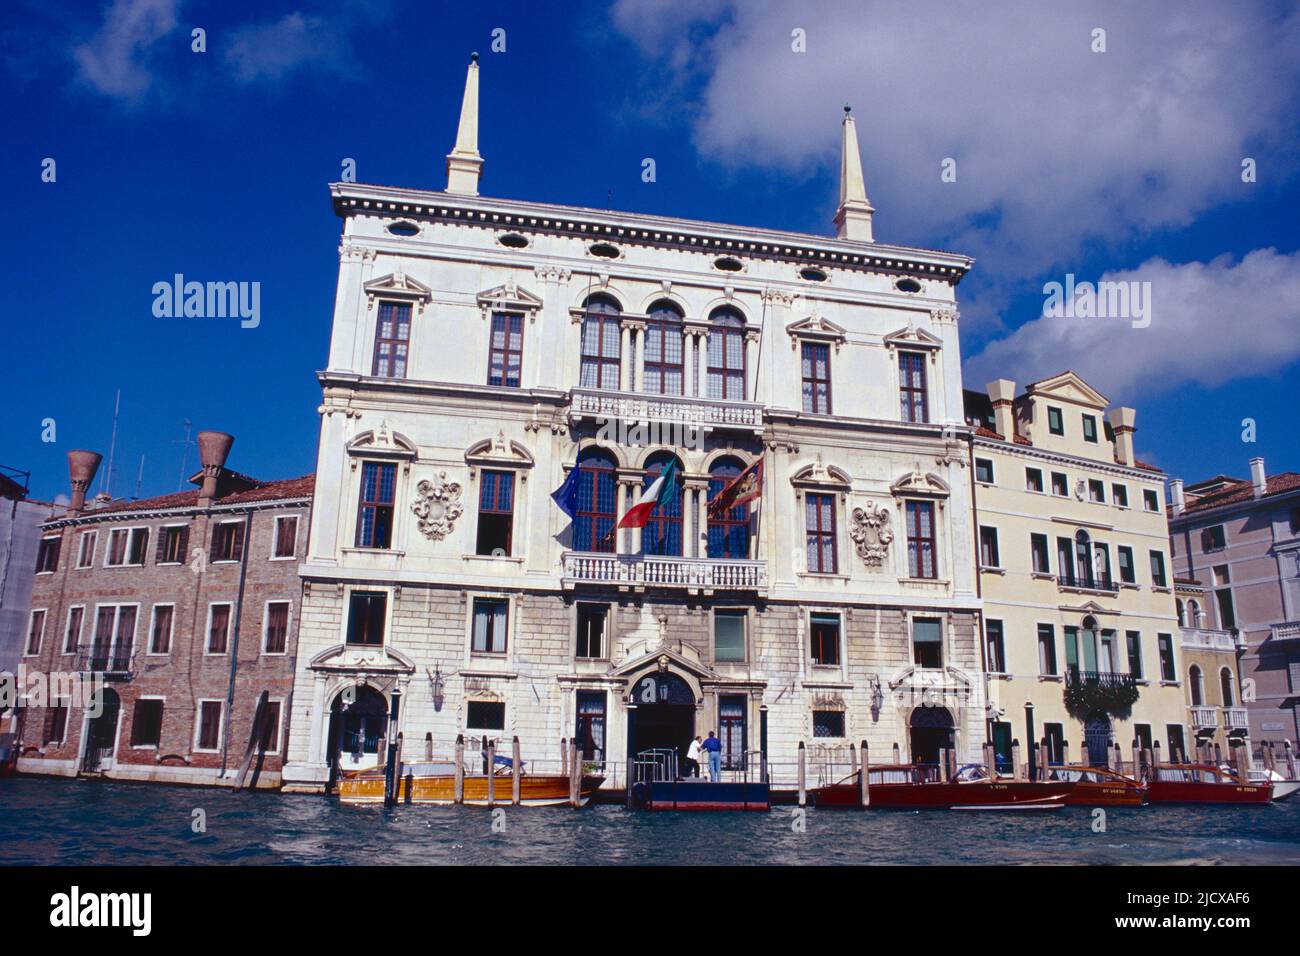 Palazzo Balbi, Grand Canal, Venice, Italy (picture taken c.1999) Stock Photo